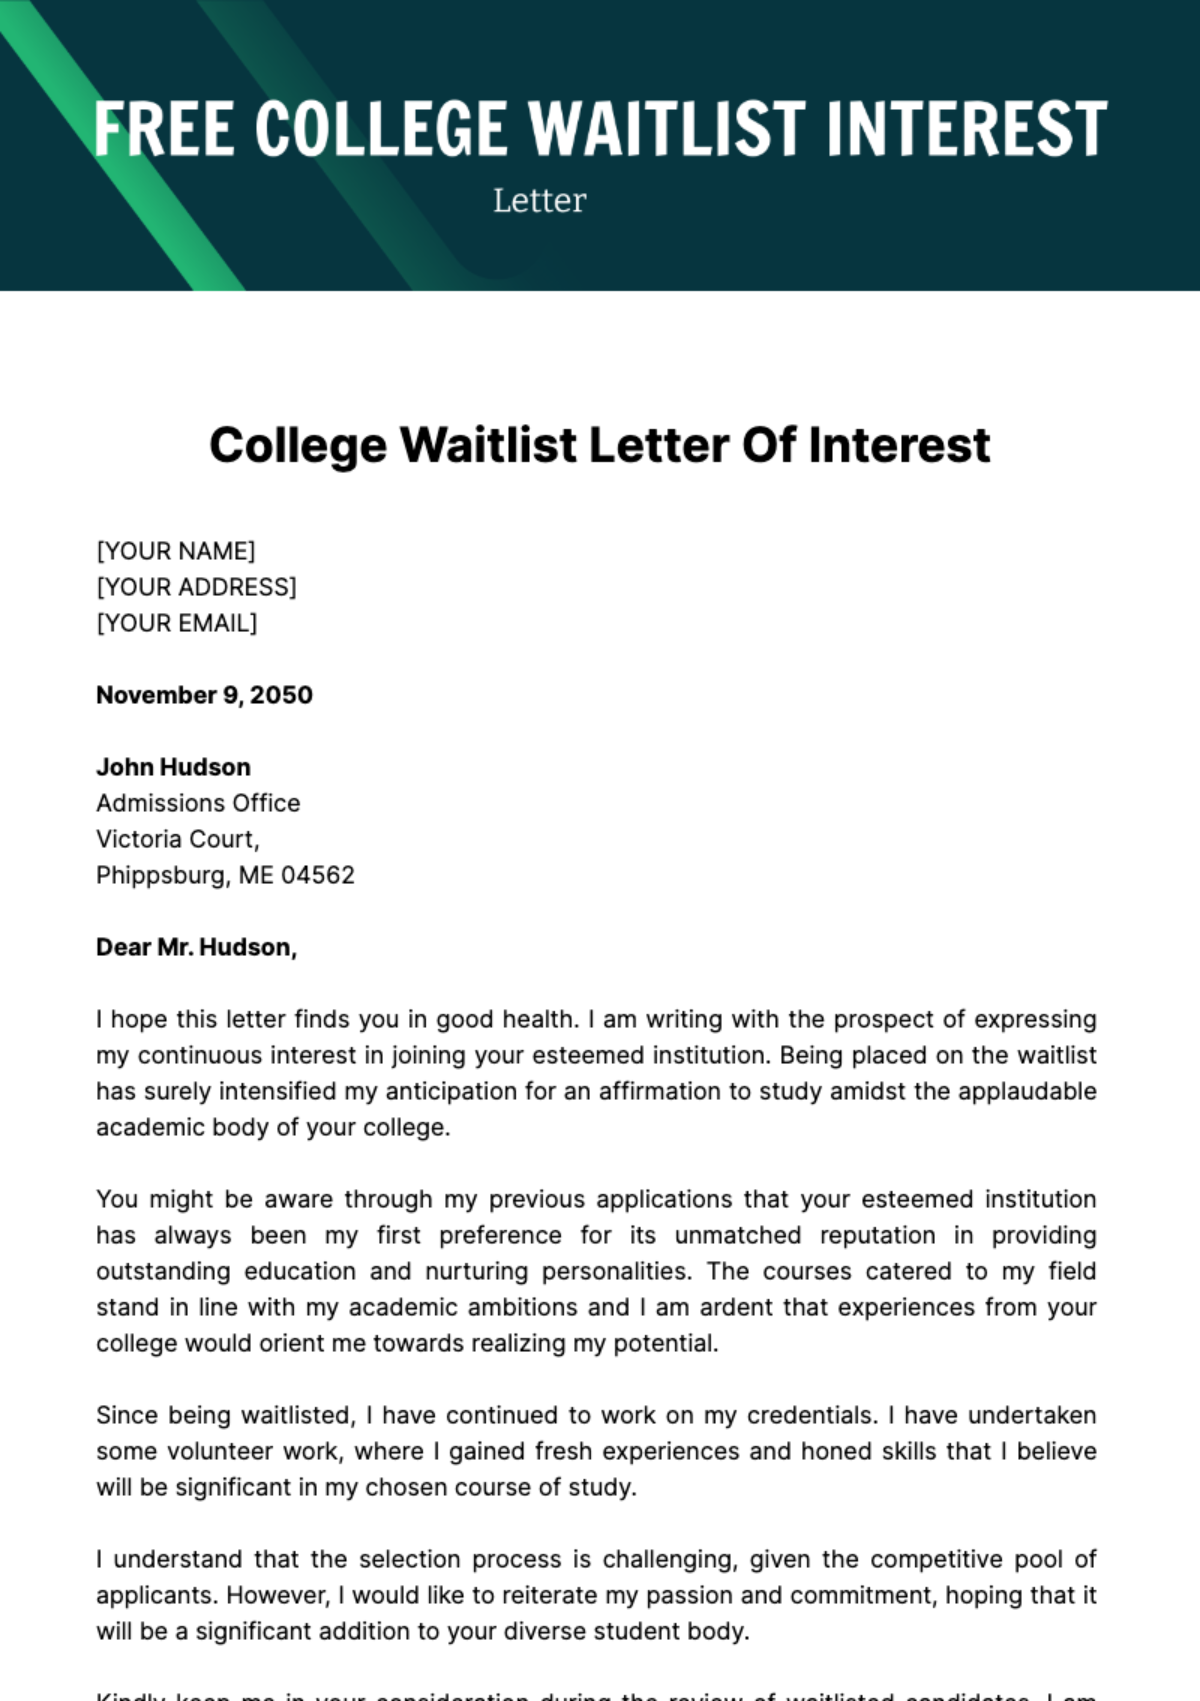 Free College Waitlist Letter of Interest template